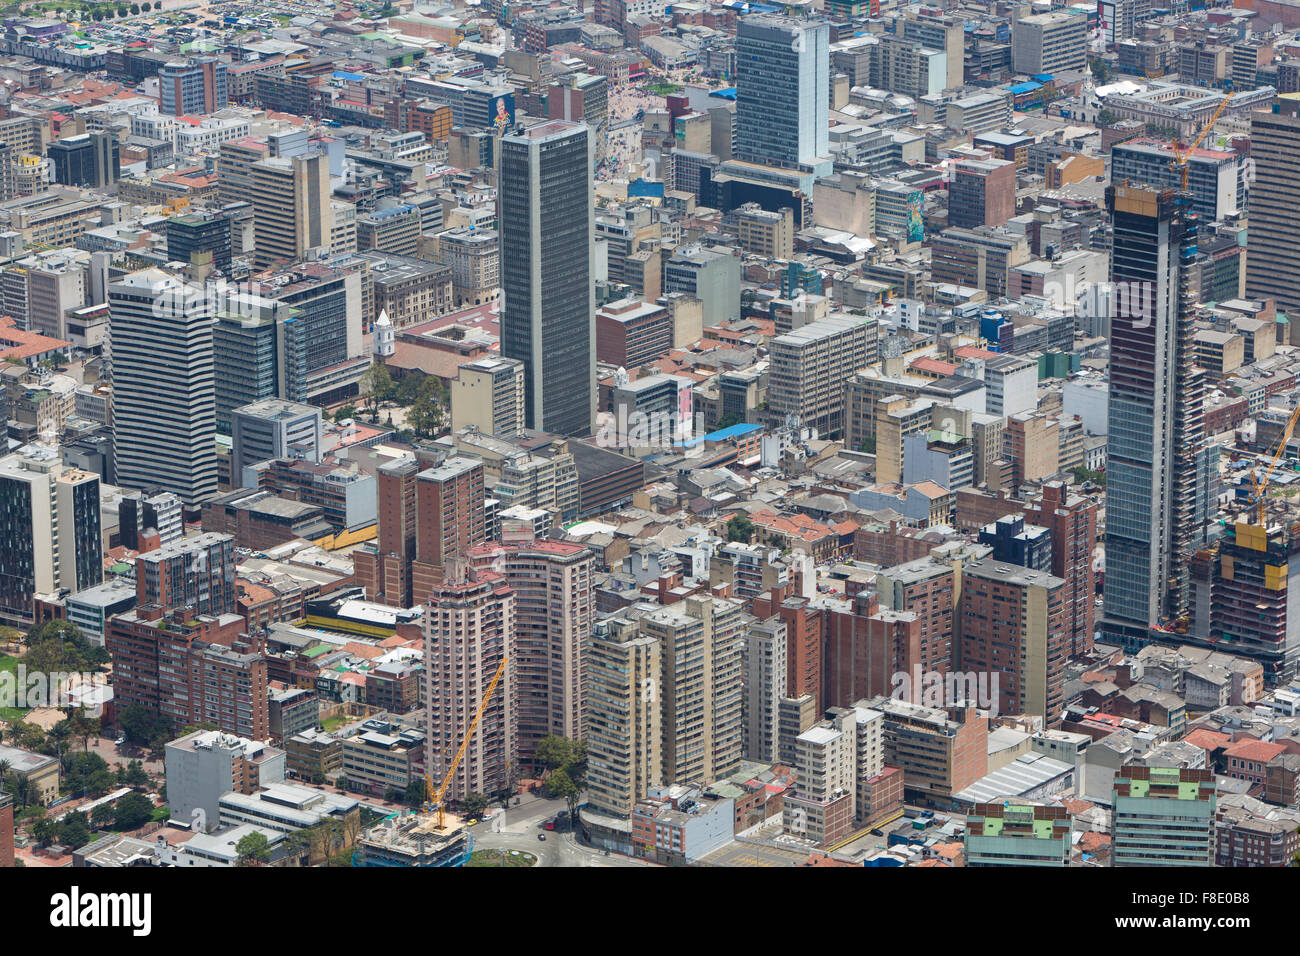 Aerial view of Bogota, Colombia Stock Photo